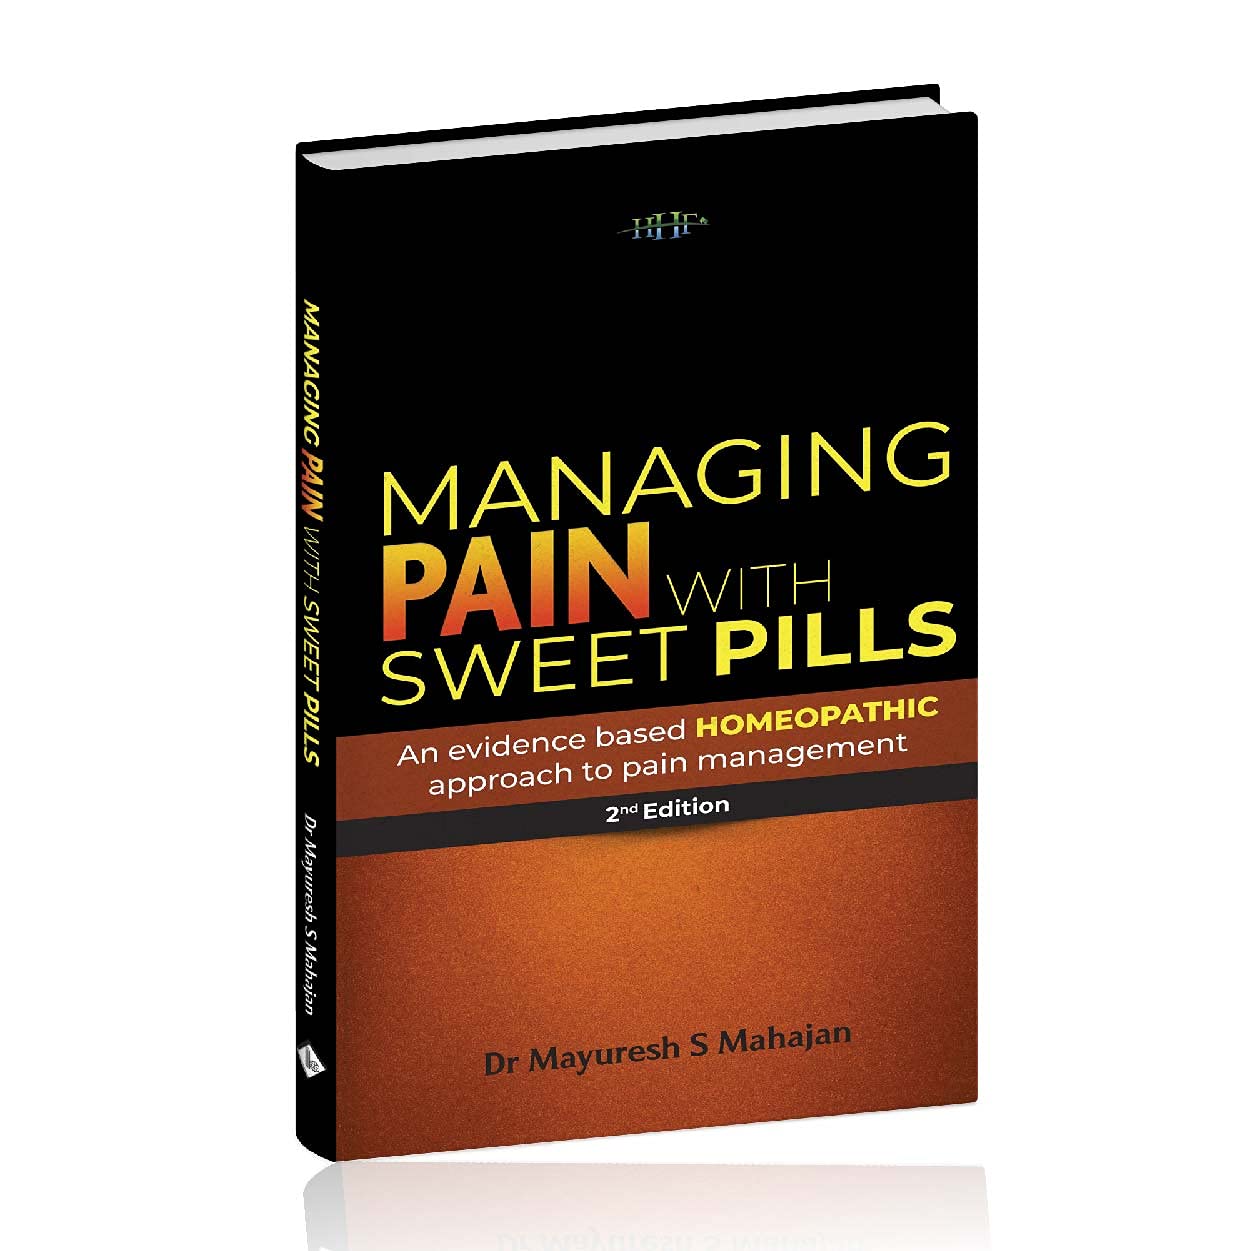 Managing Pain With Sweet Pills